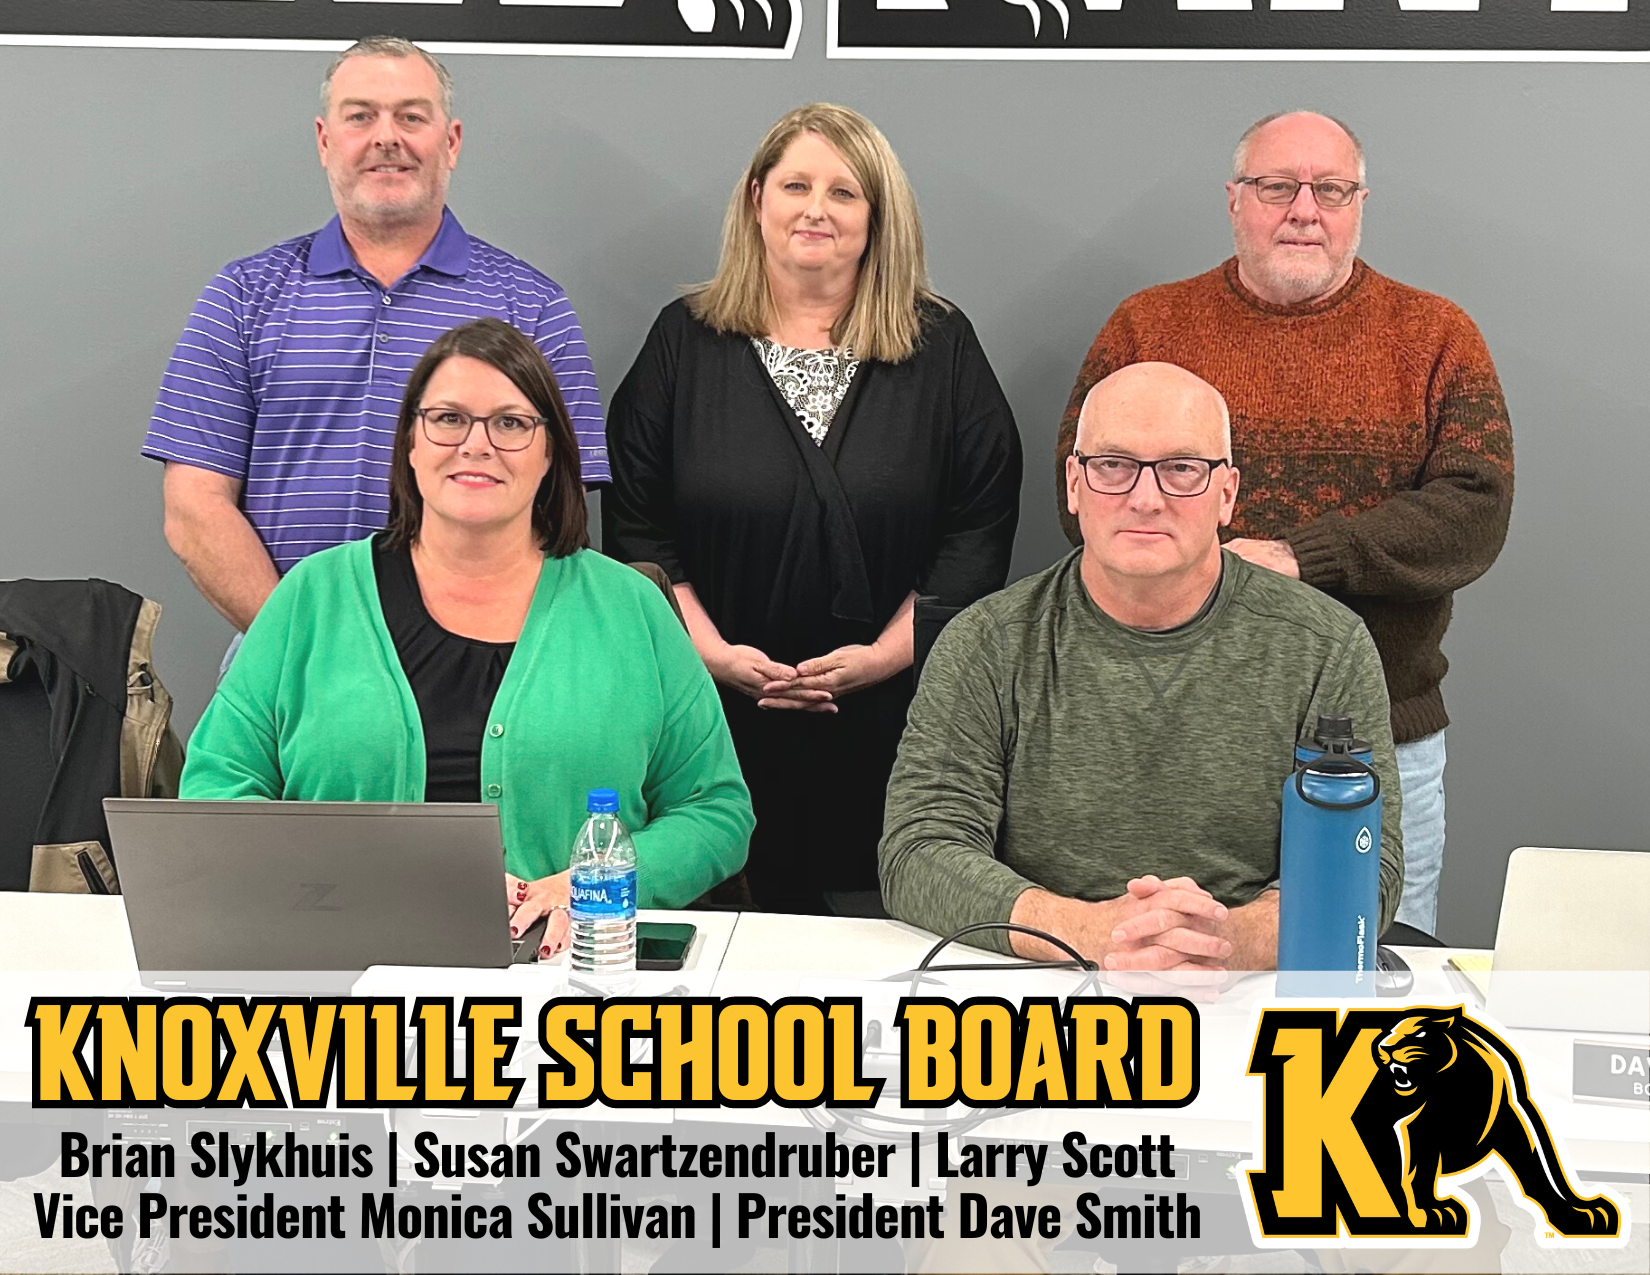 5 Knoxville school board members posing at a computer desk